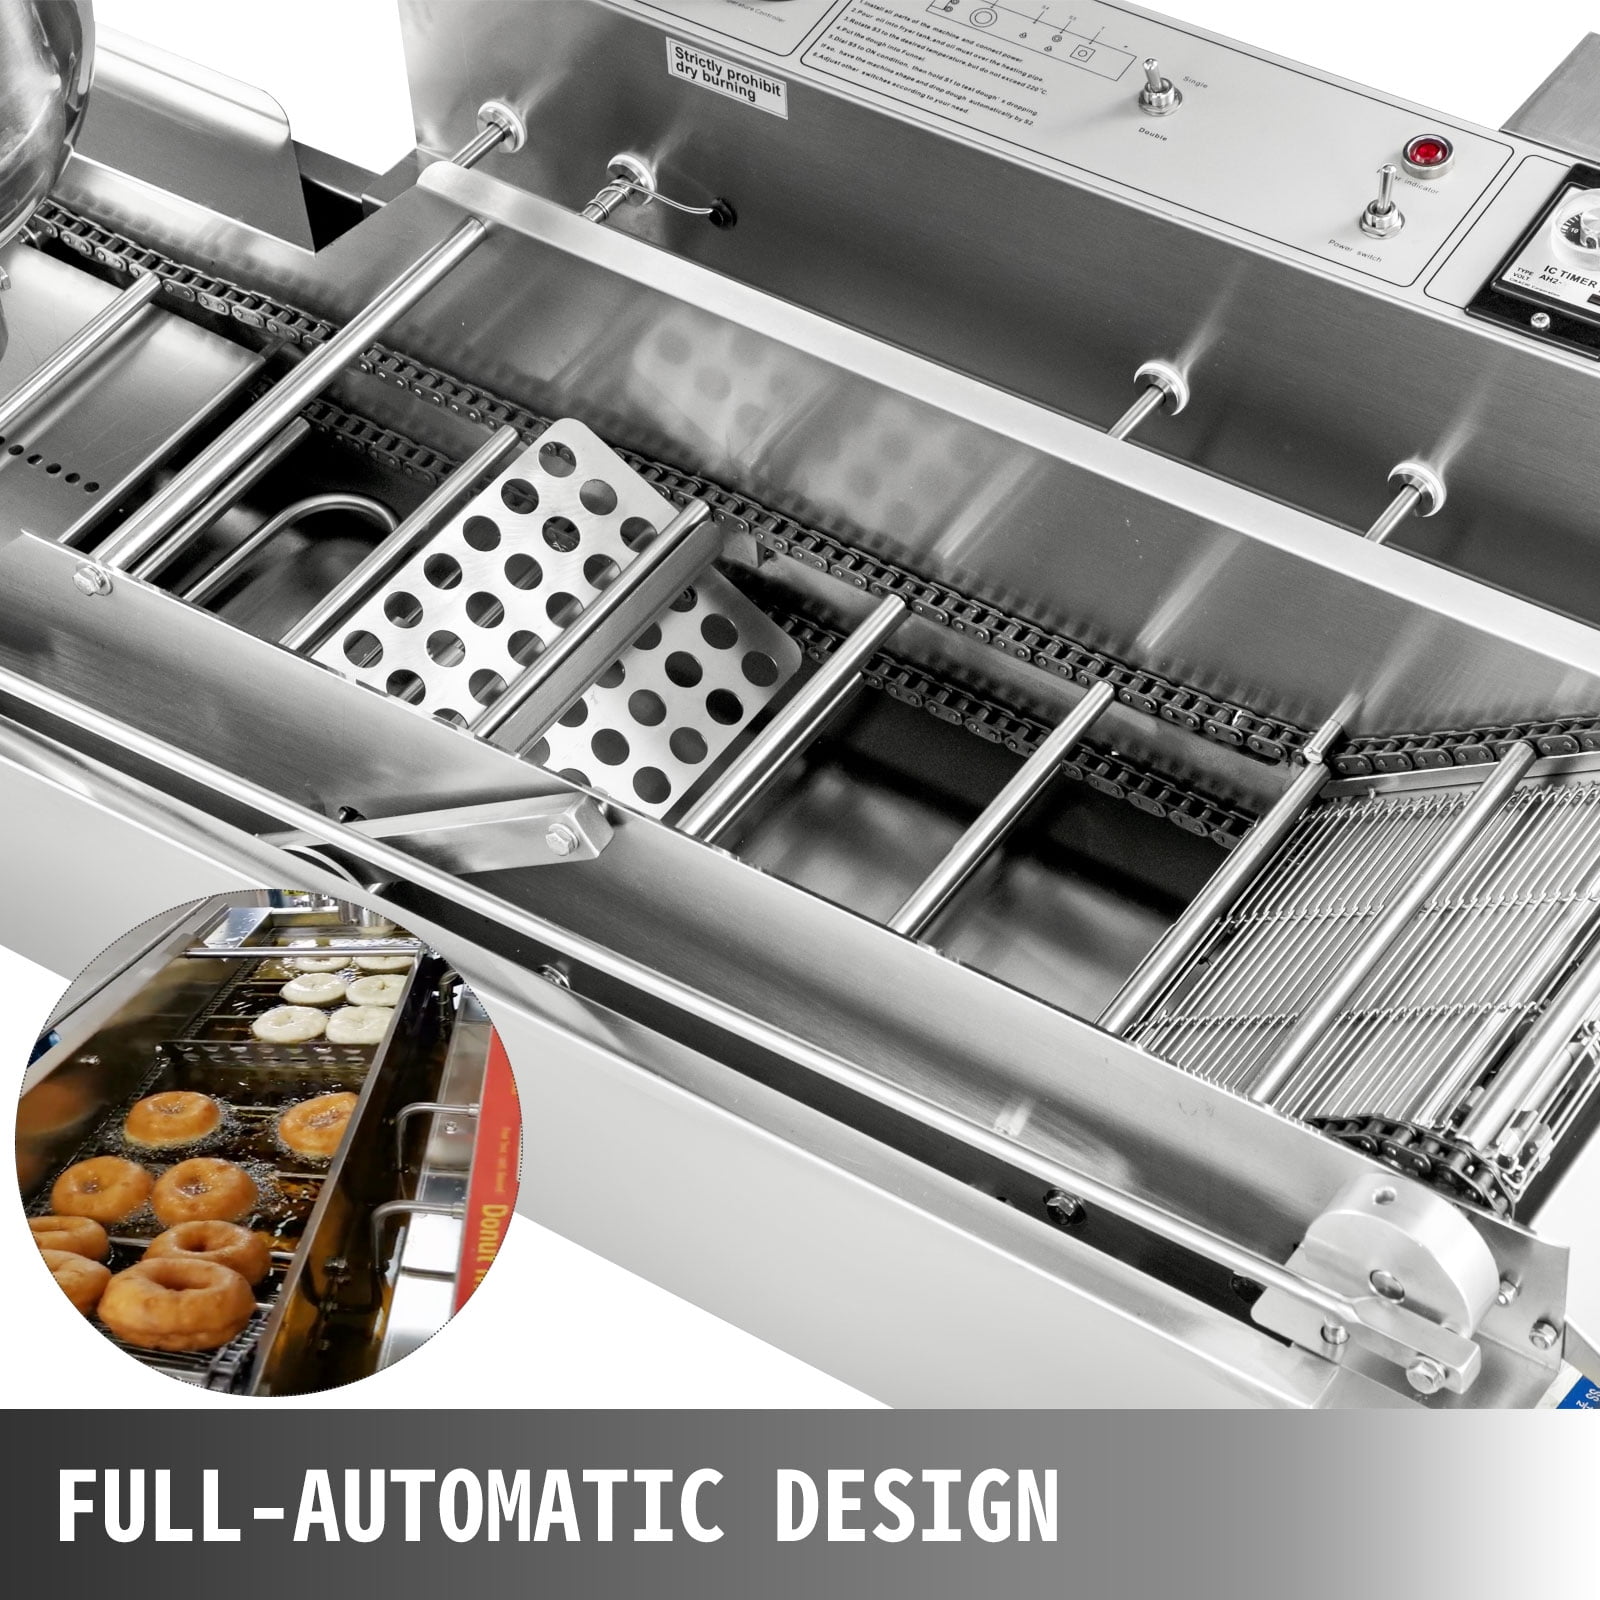 VEVOR Auto Doughnut Maker Single Row Commercial Automatic Donut Making  Machine with 7 Liter Hopper, 3 Sizes Molds, Silver QZDTTQJDP00000001V1 -  The Home Depot